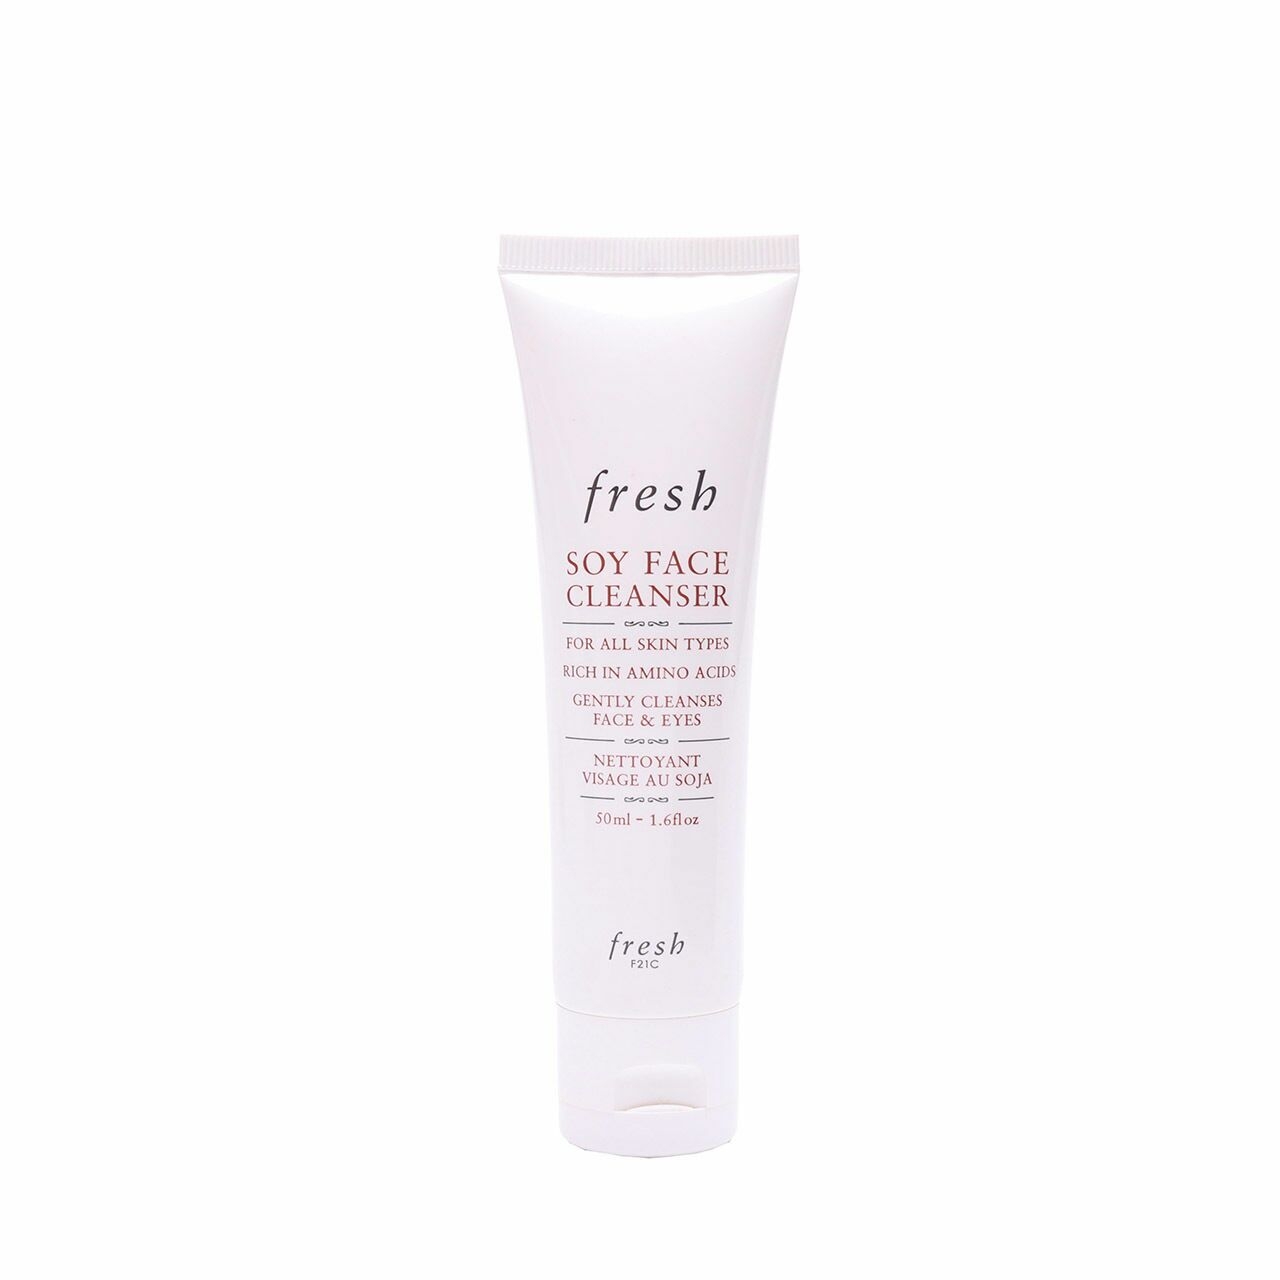 Fresh Soy Face Cleanser Skin Care